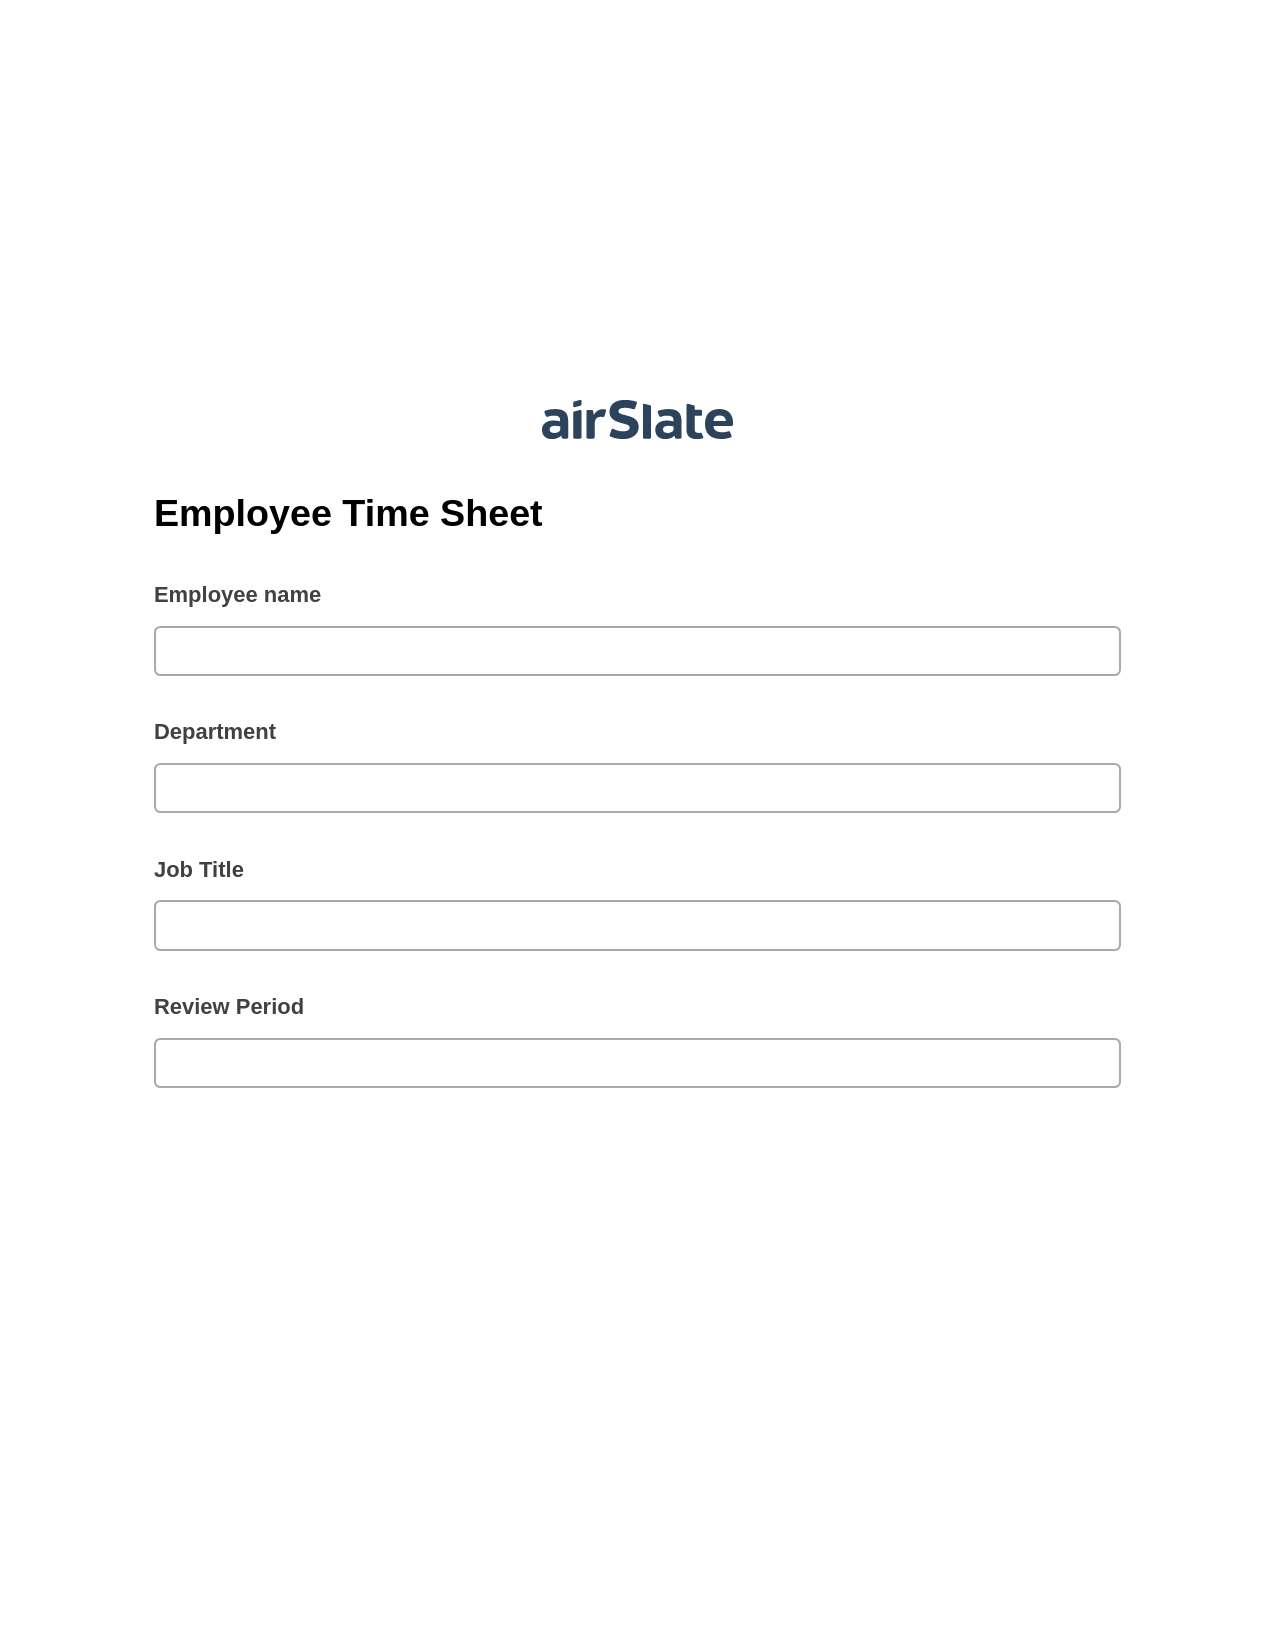 Employee Time Sheet Pre-fill from MySQL Bot, Lock the Slate Bot, Export to Excel 365 Bot